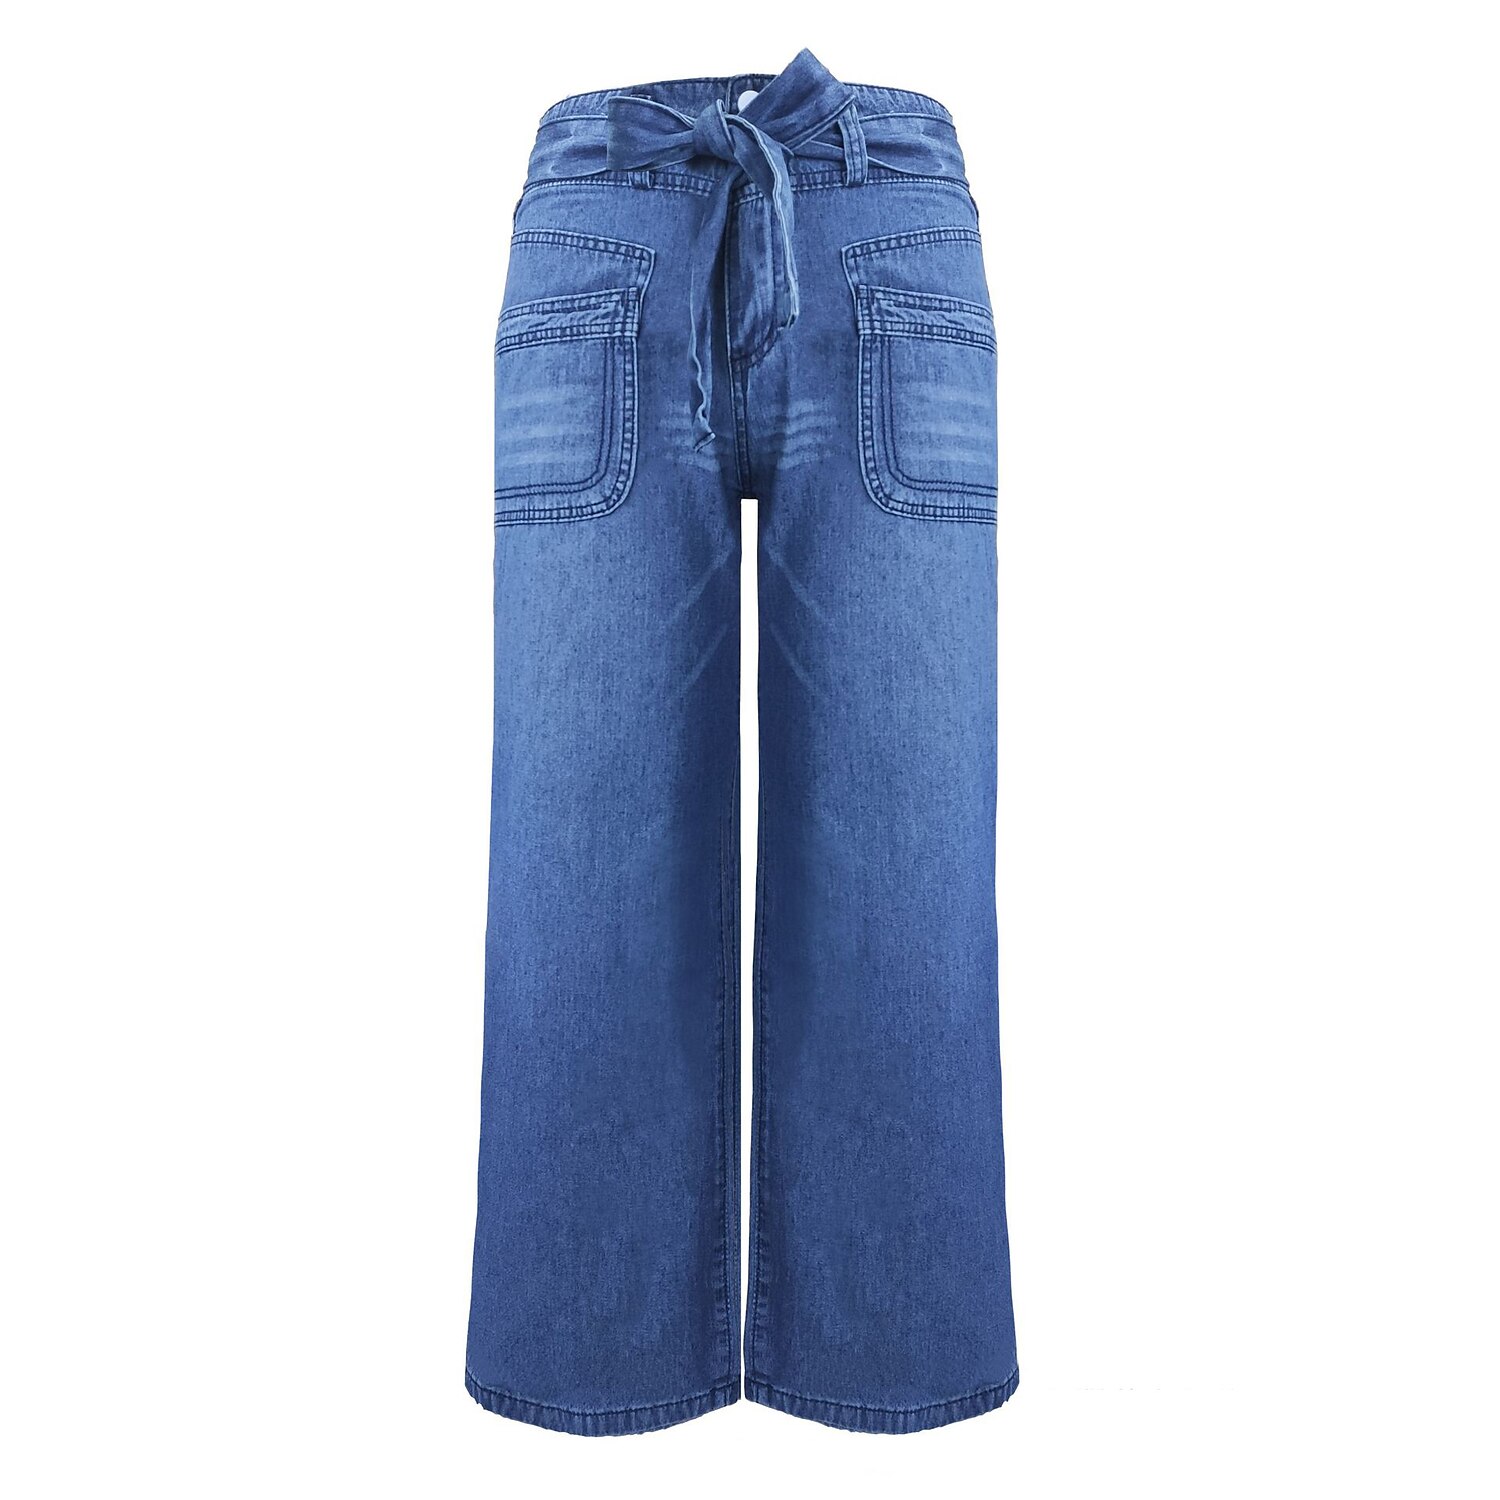 Women's Jeans Bootcut Distressed Jeans Full Length Denim Side Pockets Wide Leg Micro-elastic High Waist Fashion Casual Office Vacation Blue S M 2023 - US $29.99 –P5